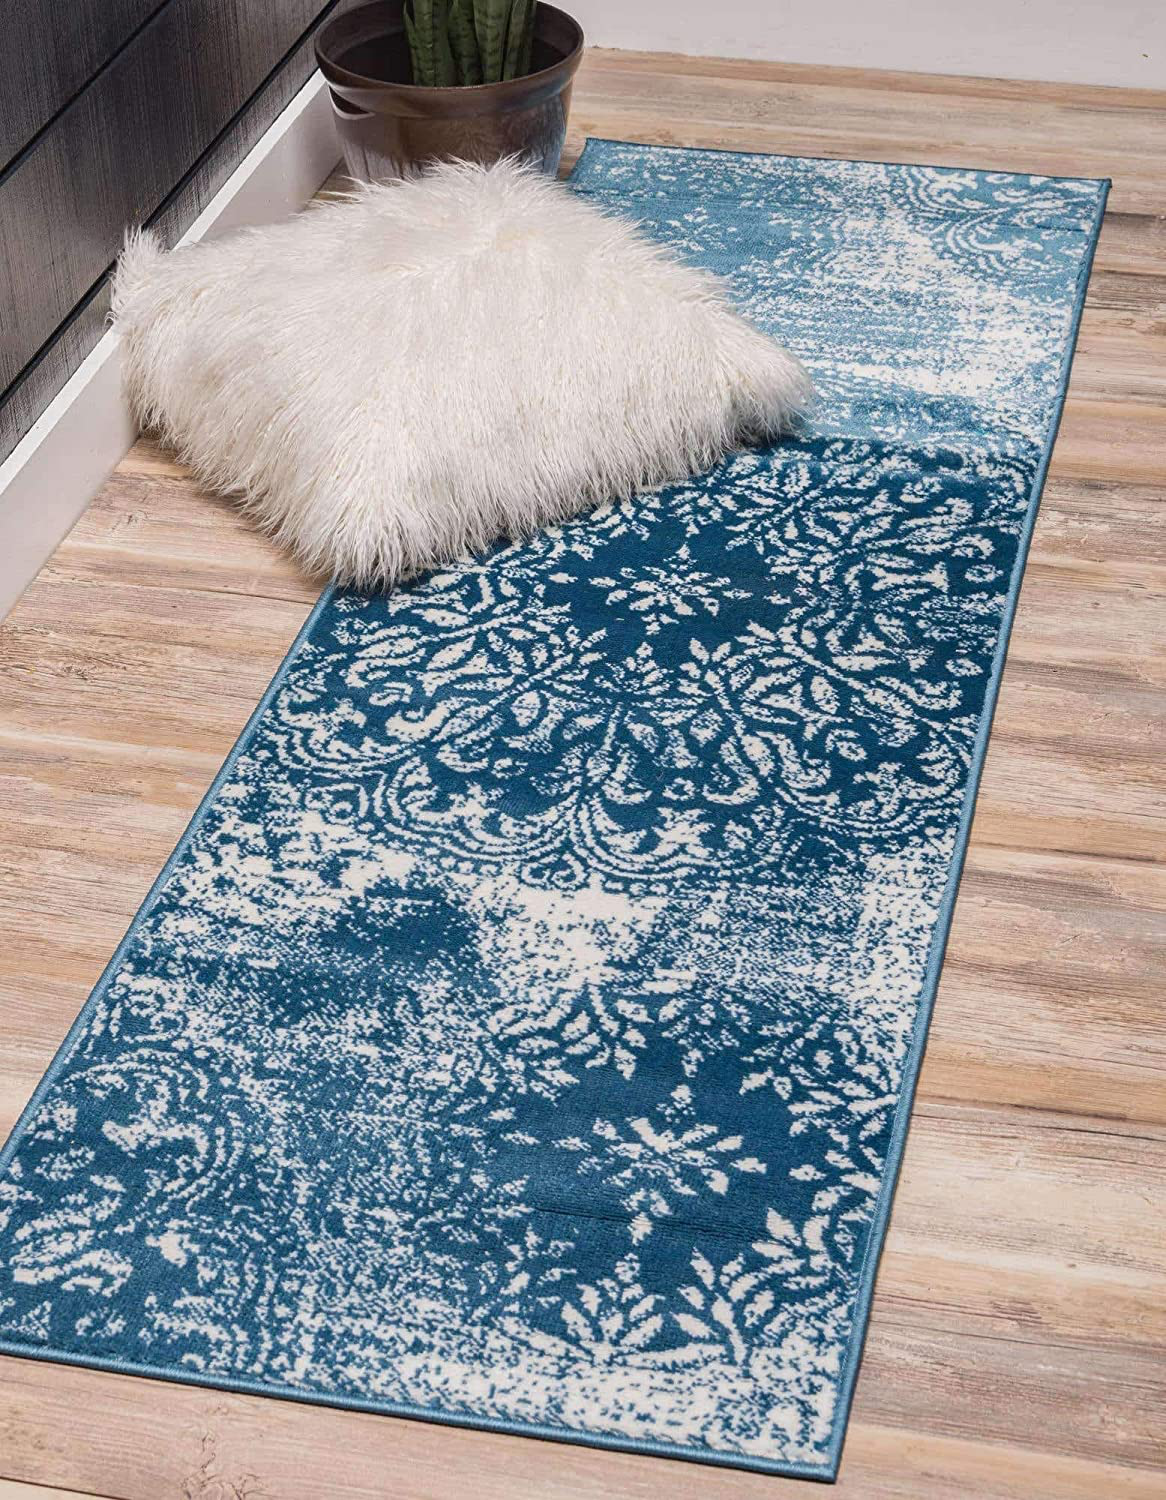 Unique Loom Sofia Collection Area Traditional Vintage Rug, French Inspired Perfect for All Home Décor, 2' 0 x 13' 0 Runner, Blue/Ivory